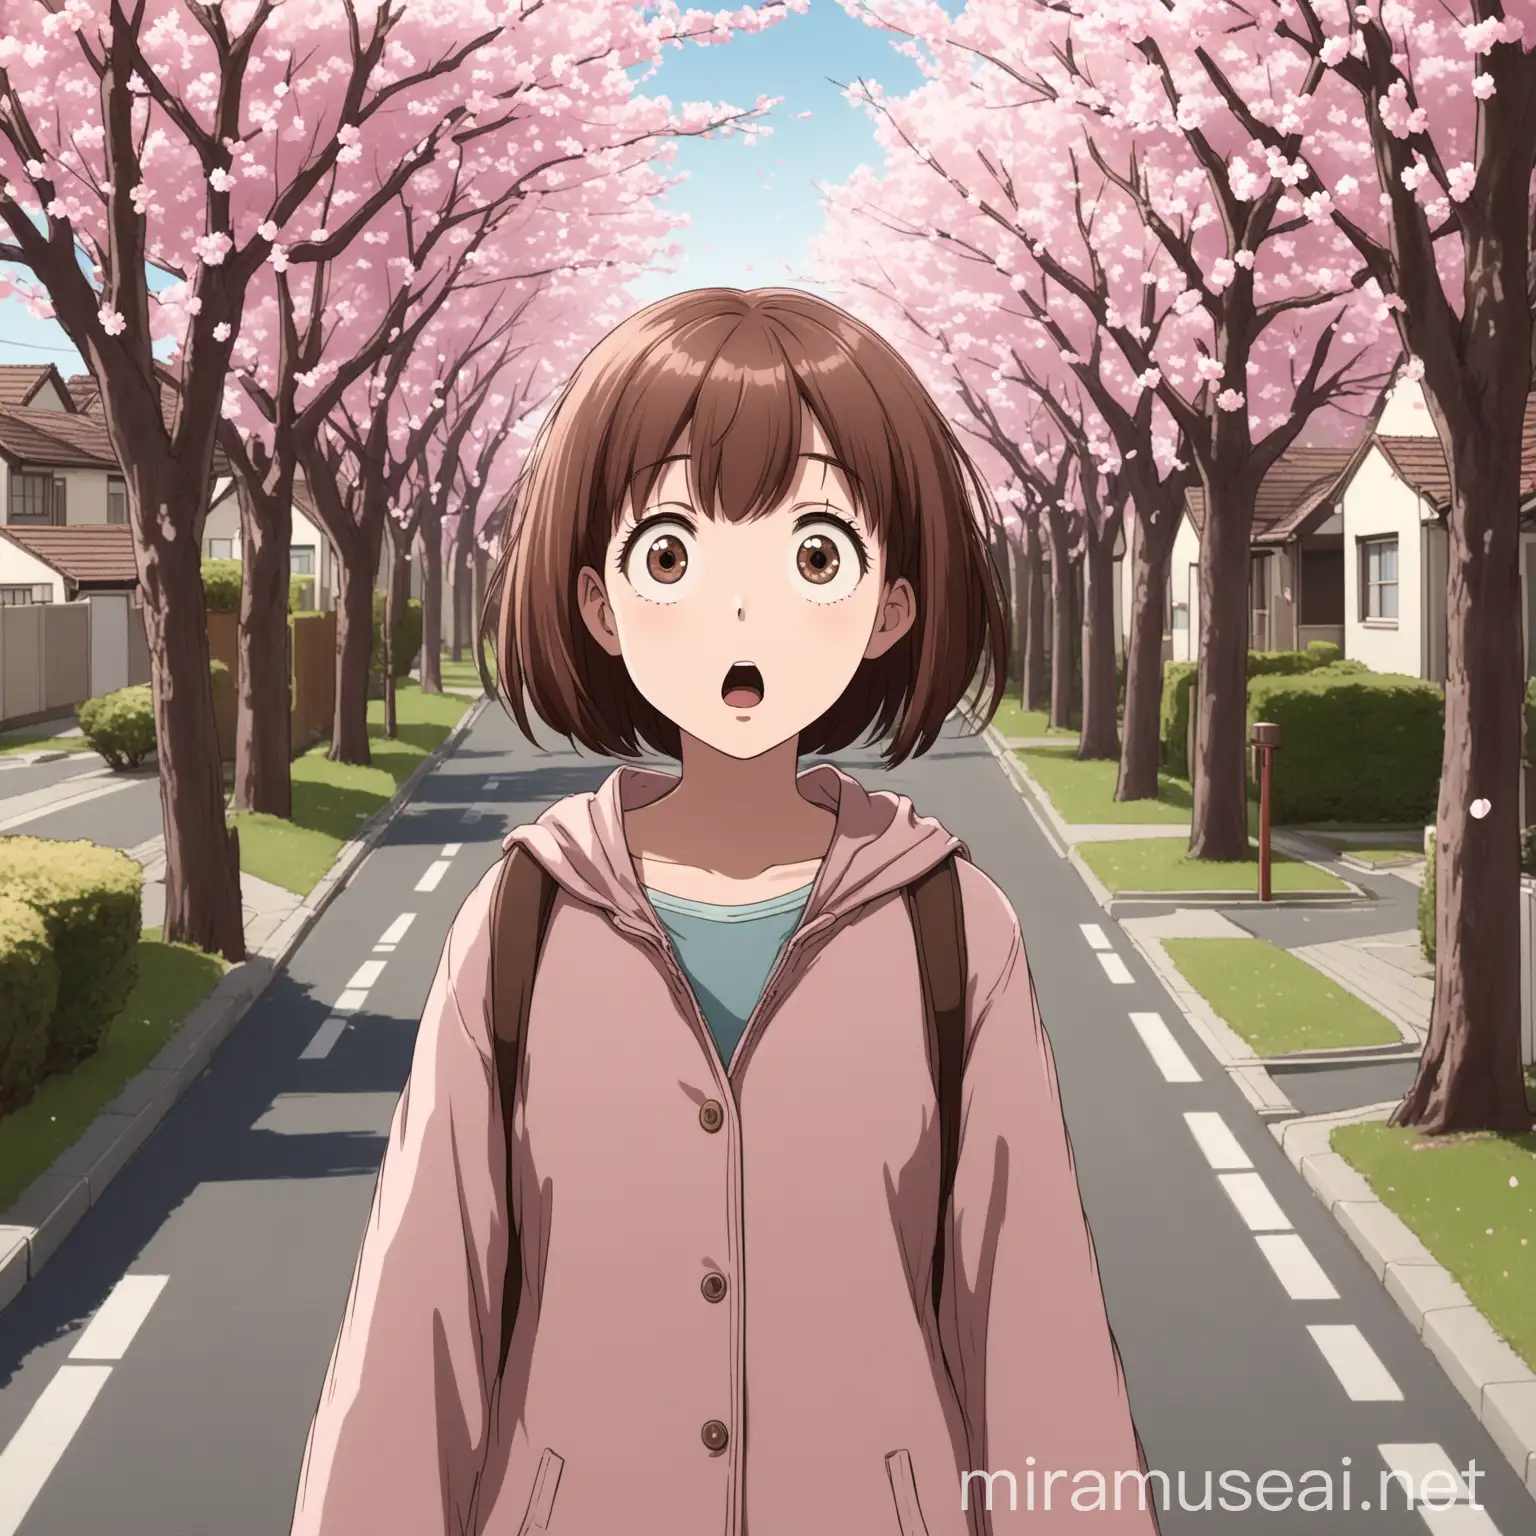 girl with short brown hair and brown eyes, looking surprised, a quiet suburban street lined with cherry blossom trees